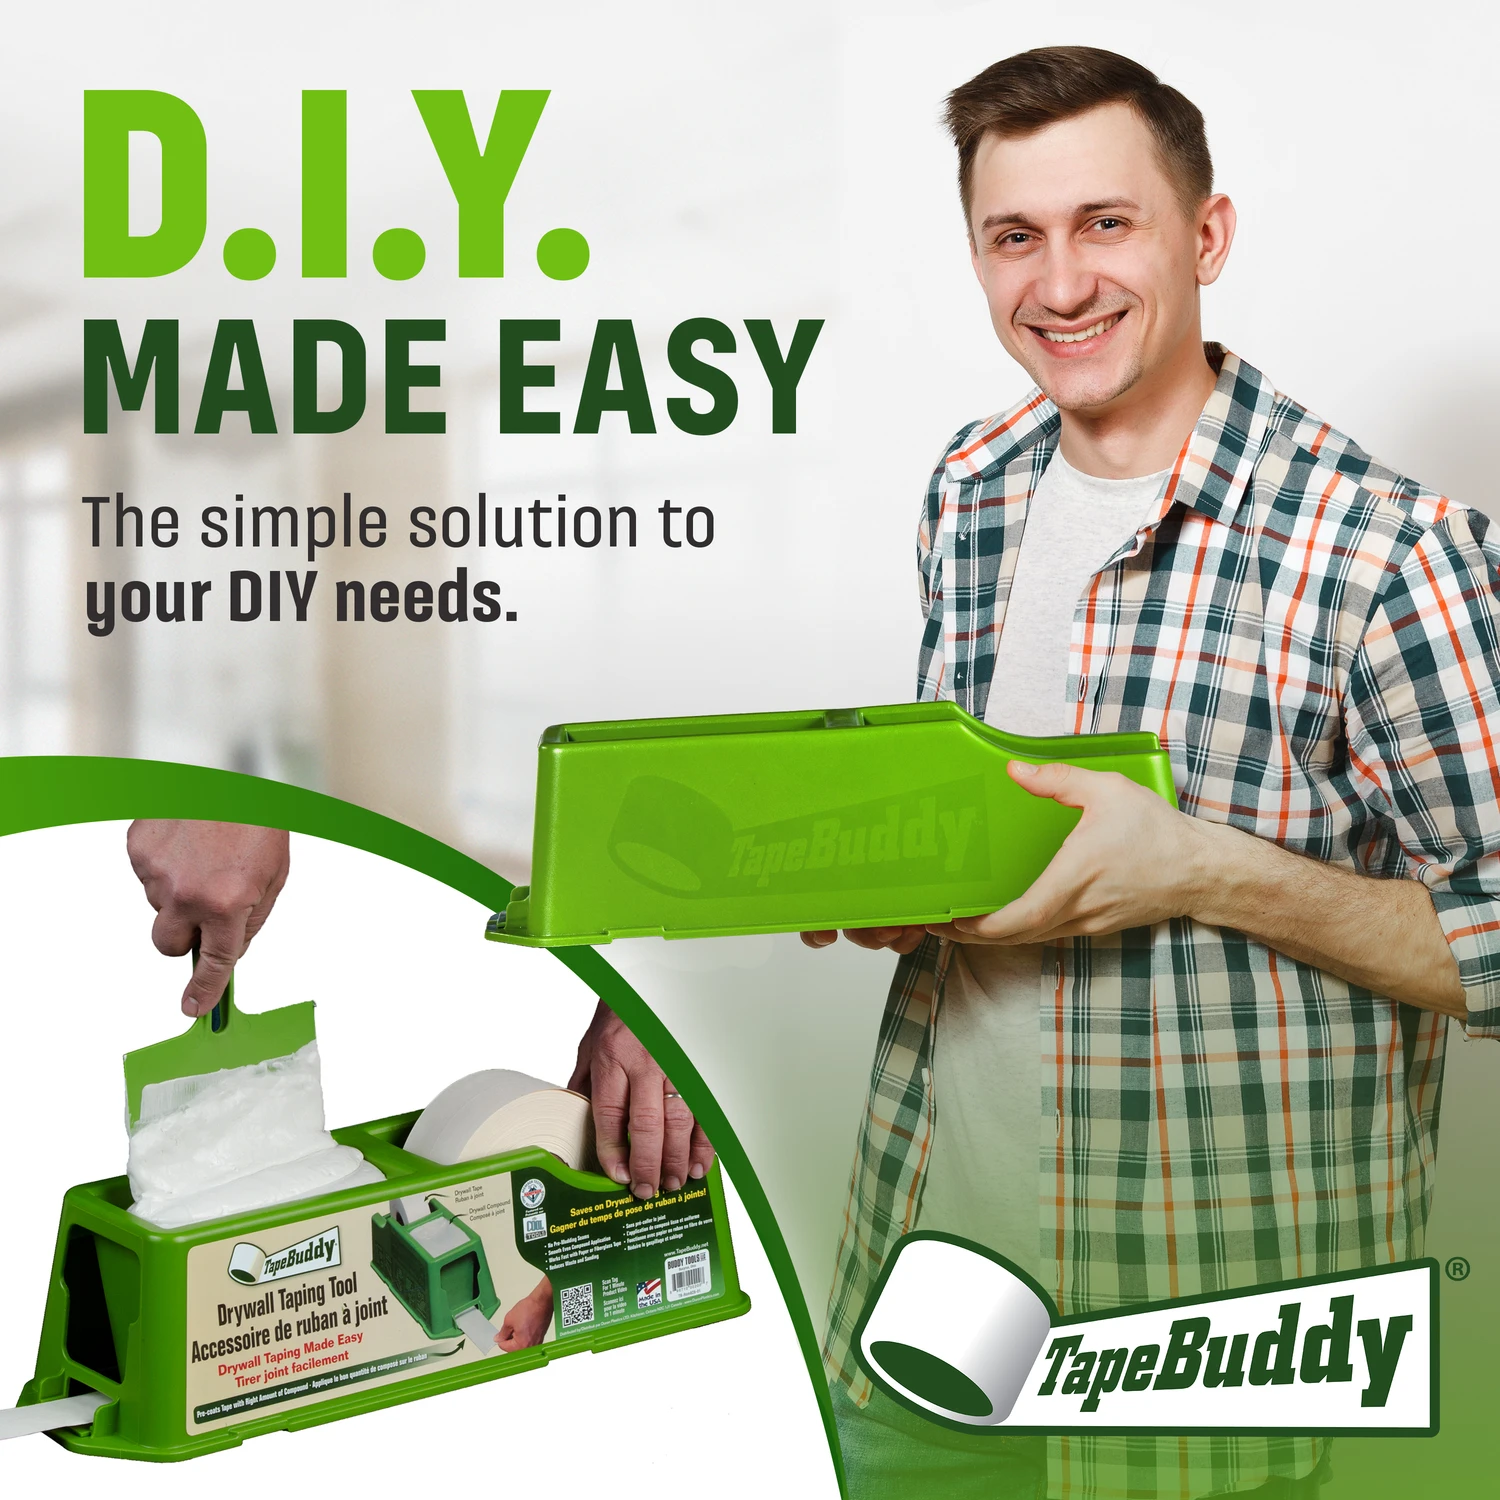 TapeBuddy® by Buddy Tools – Free-Standing Drywall Taping Tool – Mess-Free  and Rust-Free Drywall Tape Holder for Drywall Mud and Joint Compound  Application – Easy to Use with Standard Dry Wall Tape